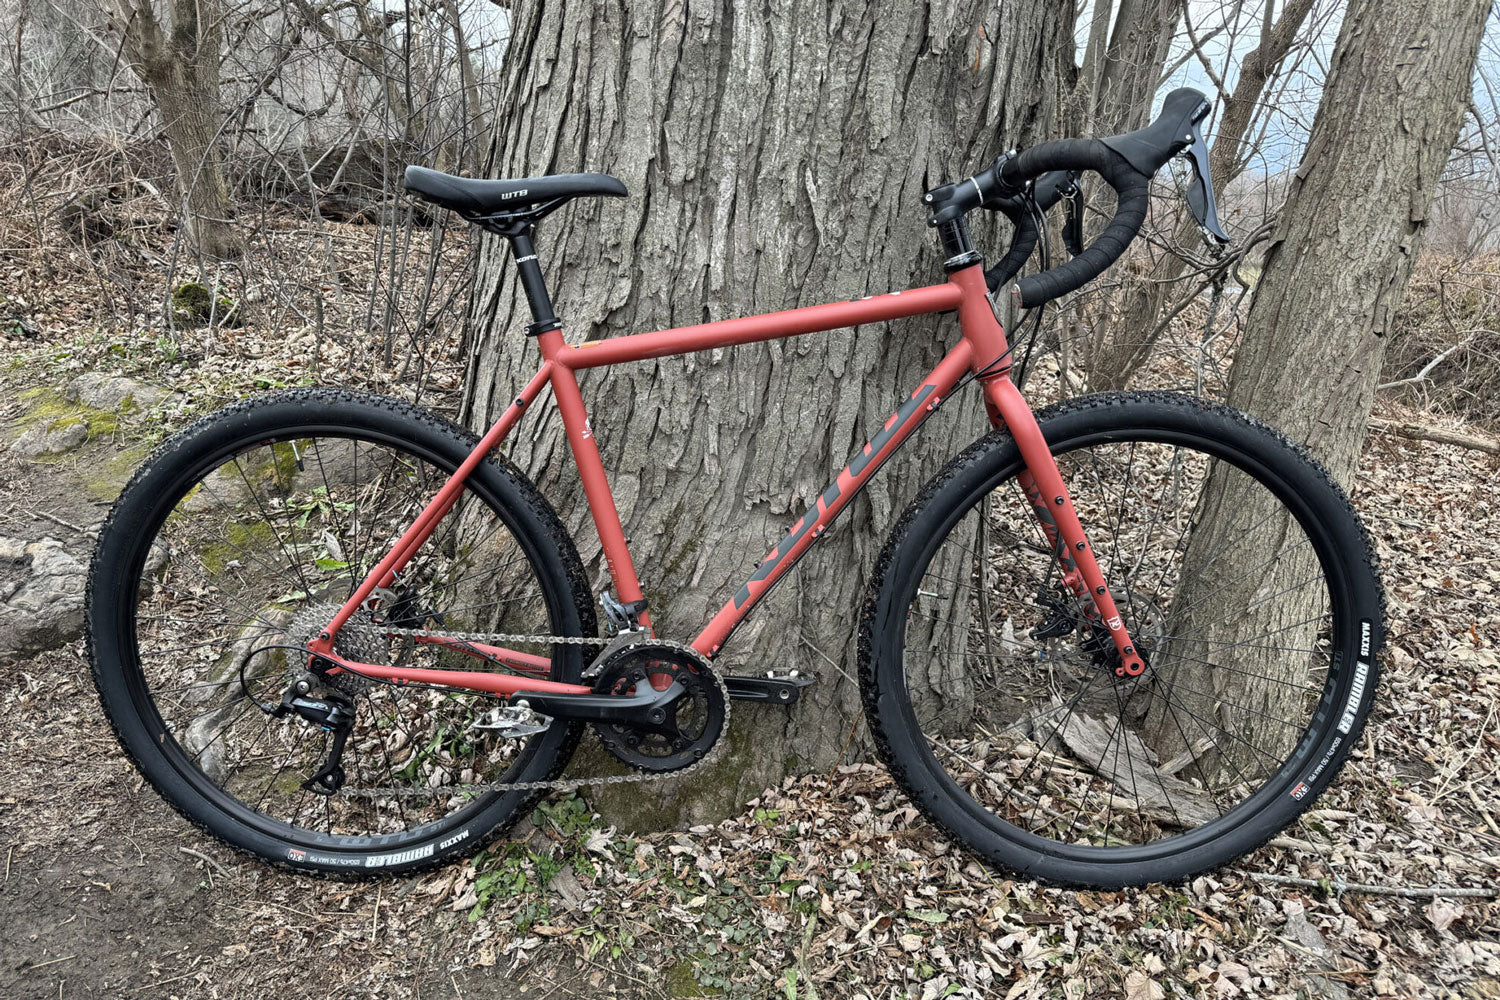 Gear Junkie Reviews the Kona Rove "One of the most affordable yet capable gravel bikes you can buy"